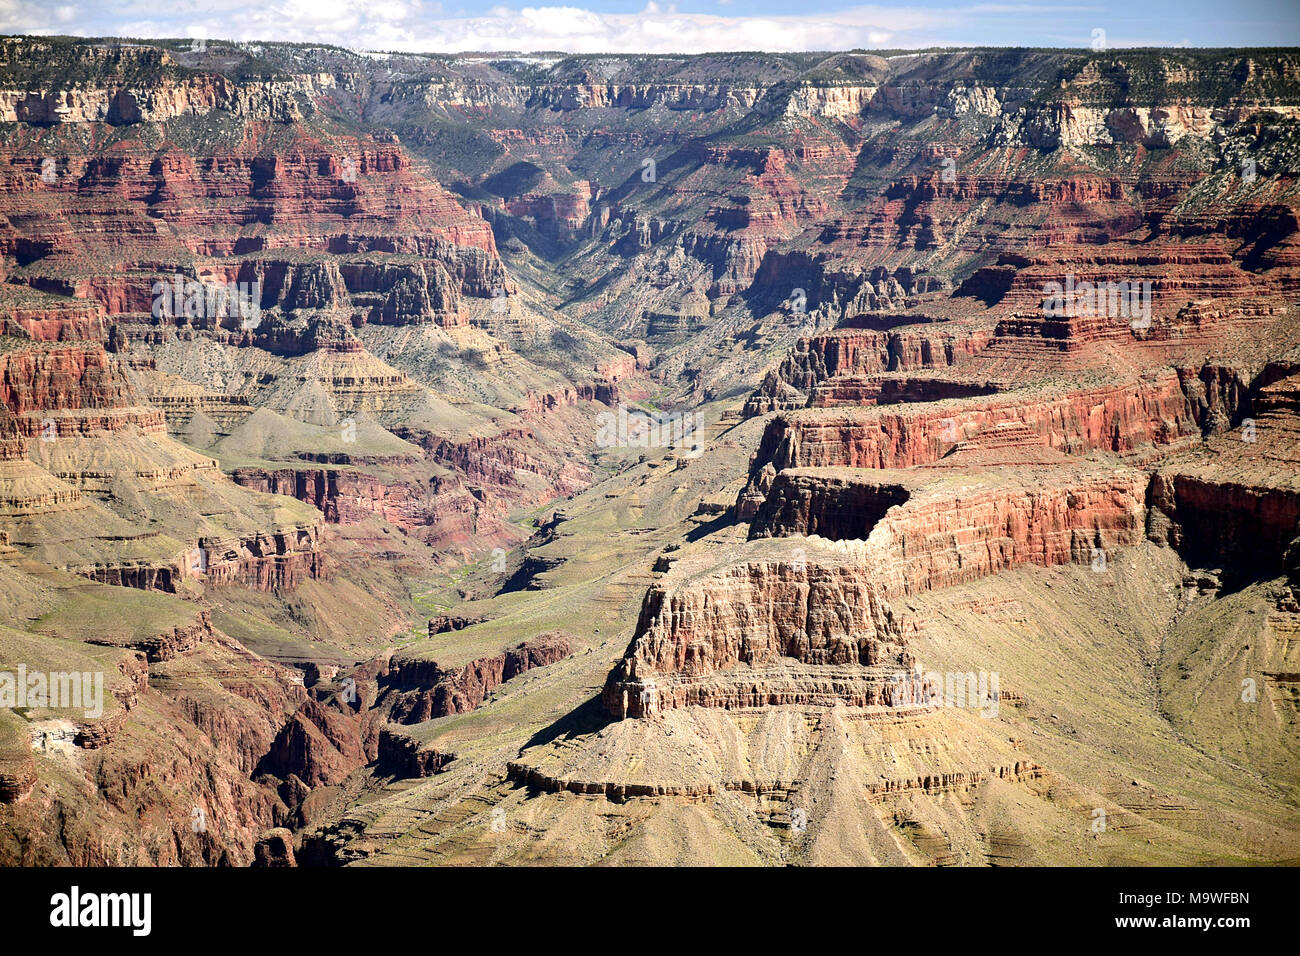 Landscape of the Grand Canyon National Park, USA Stock Photo